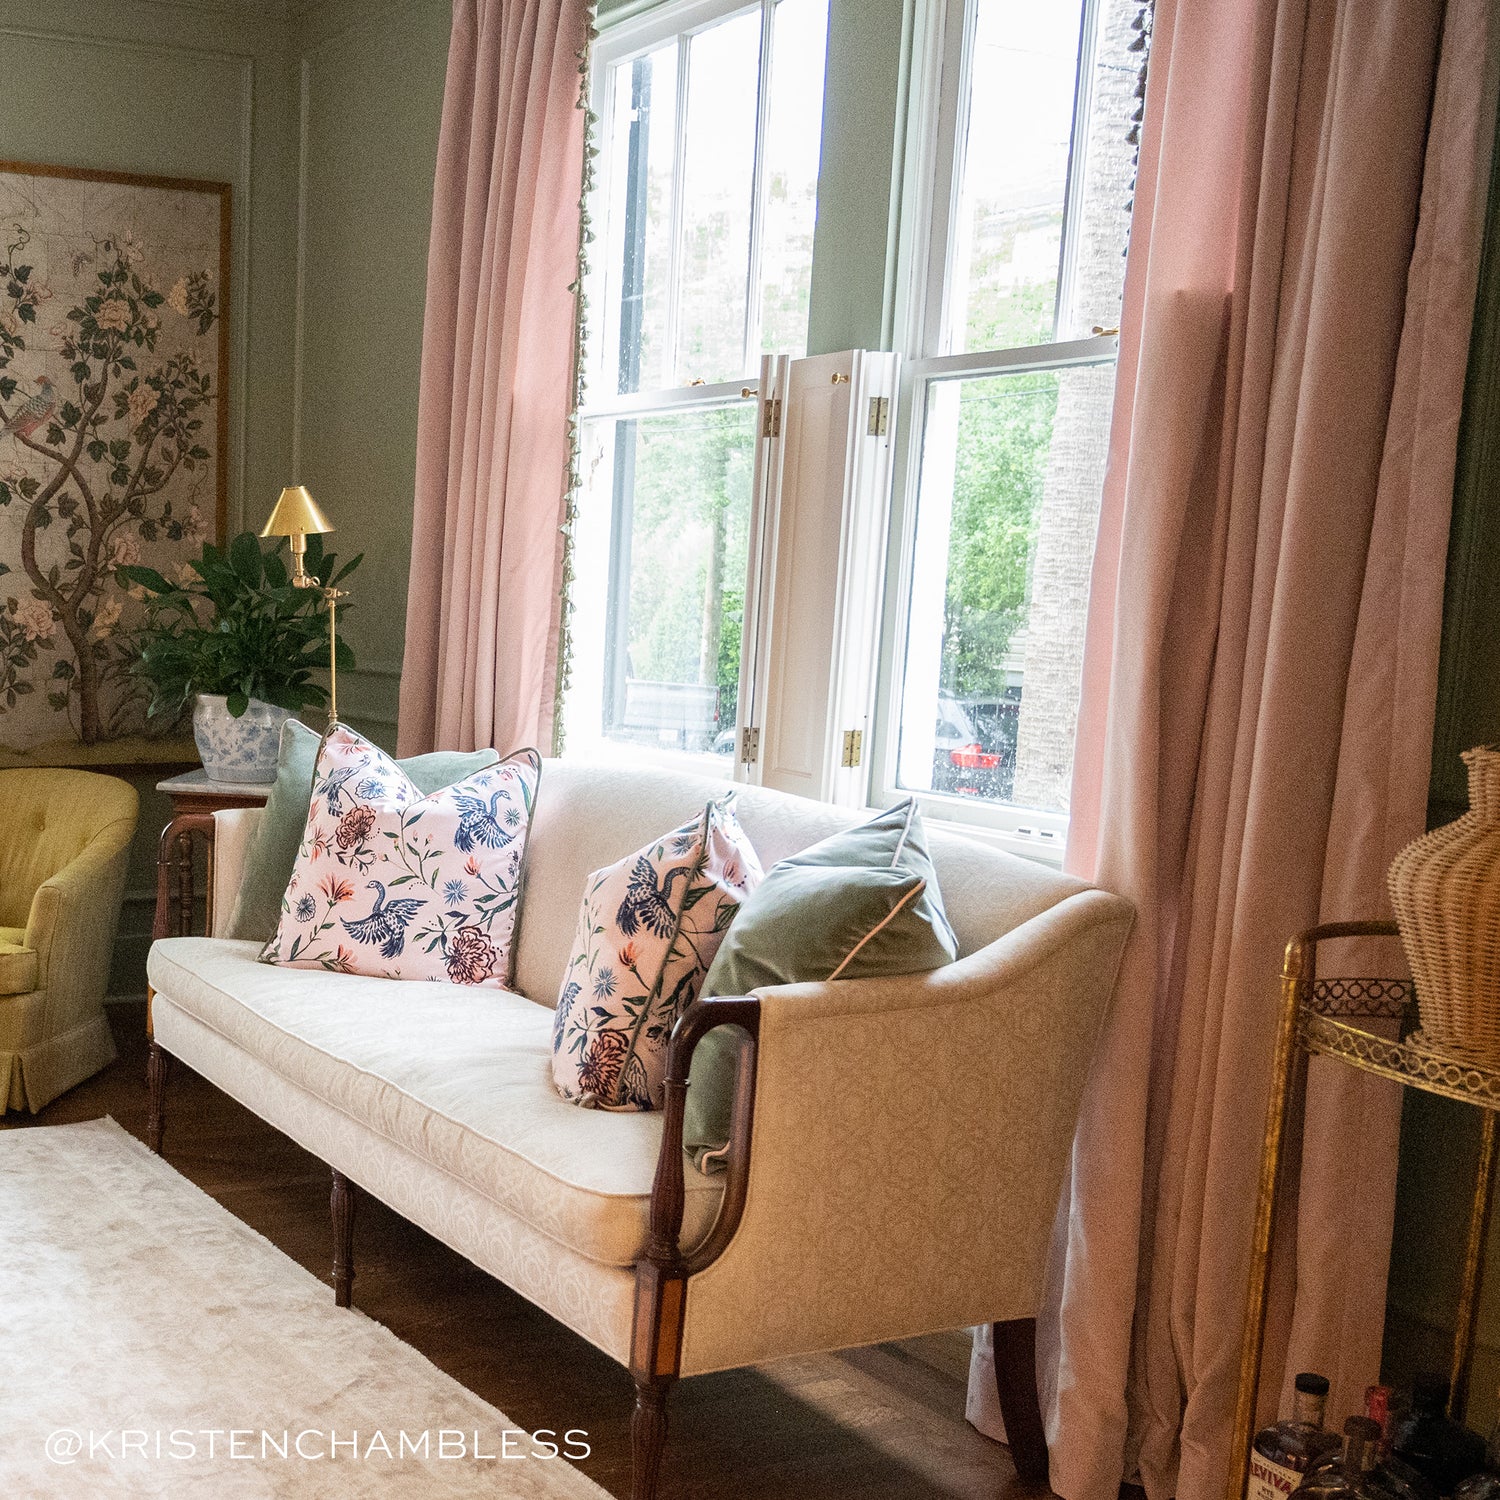 Living room styled with two Pink Chinoiserie Pillows facing each other and two fern green pillows by them on cream couch with window to the back styled with pink curtains with green pom pom fringe. Photo taken by Kristen Chambless